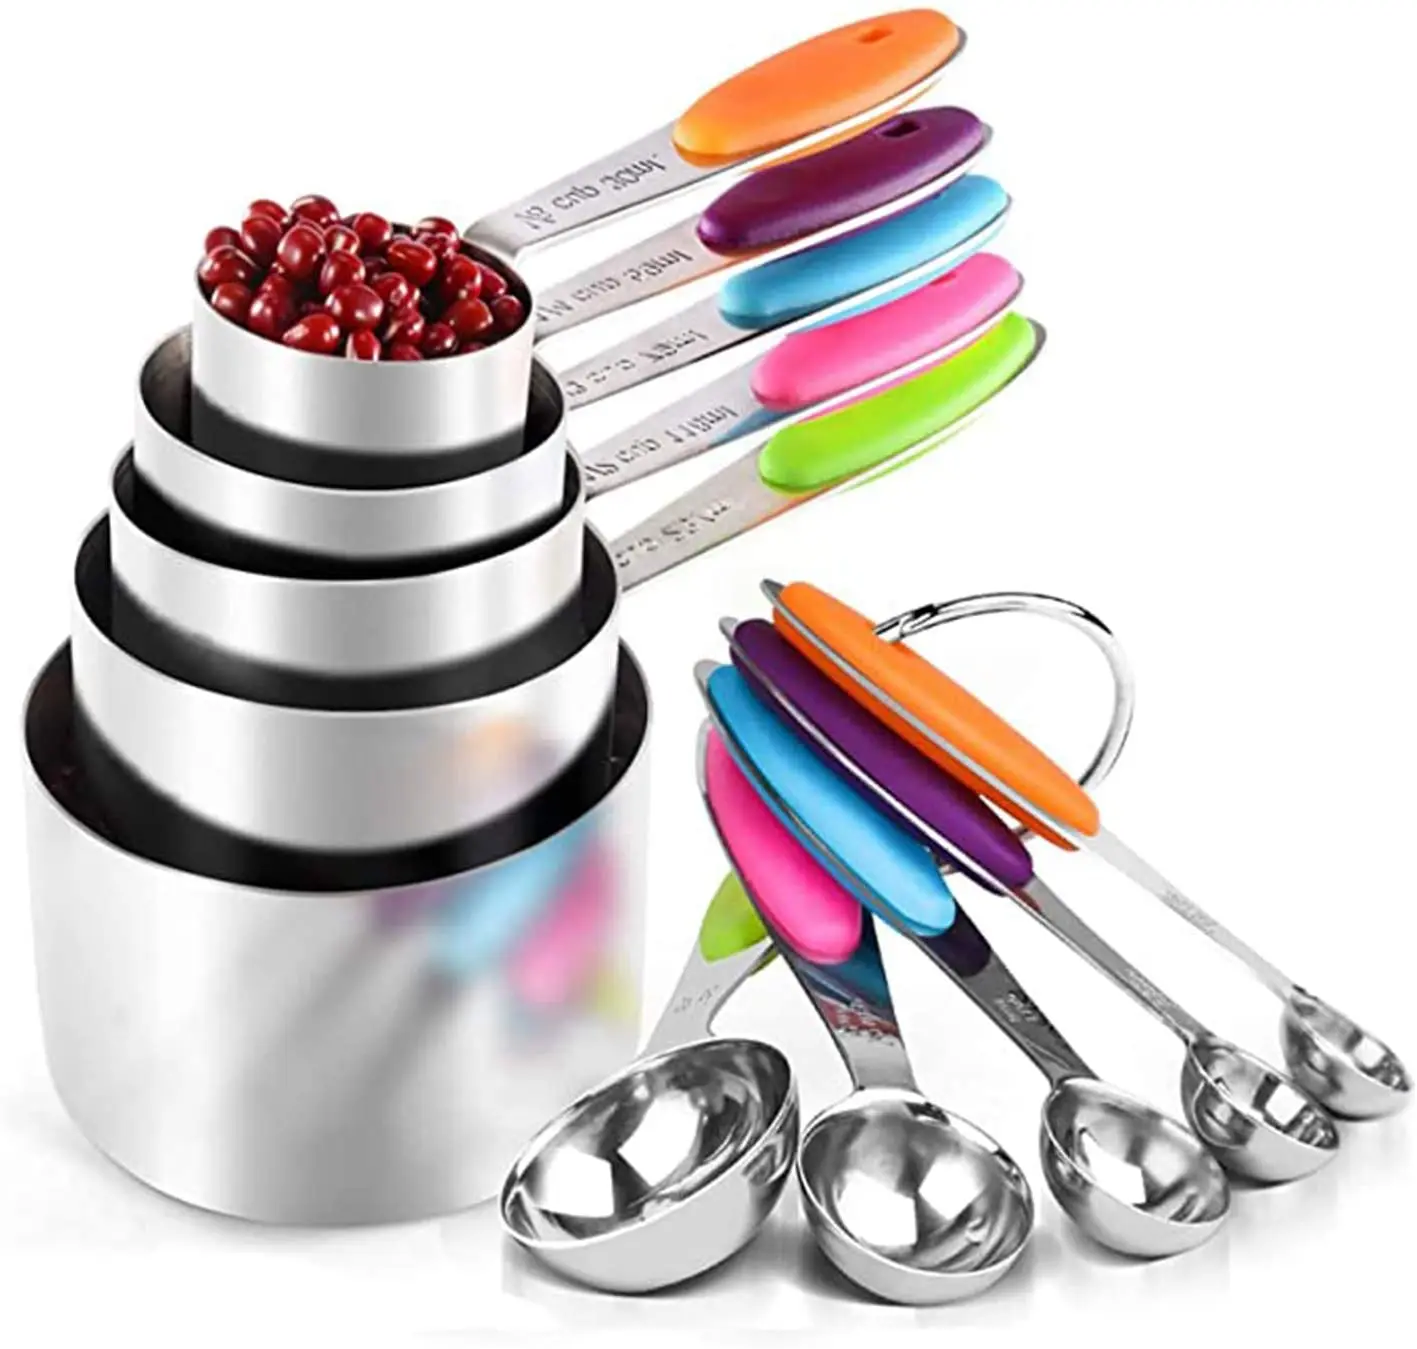 

10 Piece Stainless Steel Measuring Cups and Spoons Set Measuring Toolsfor Kitchen DIY Making Dry and Liquid Ingredient